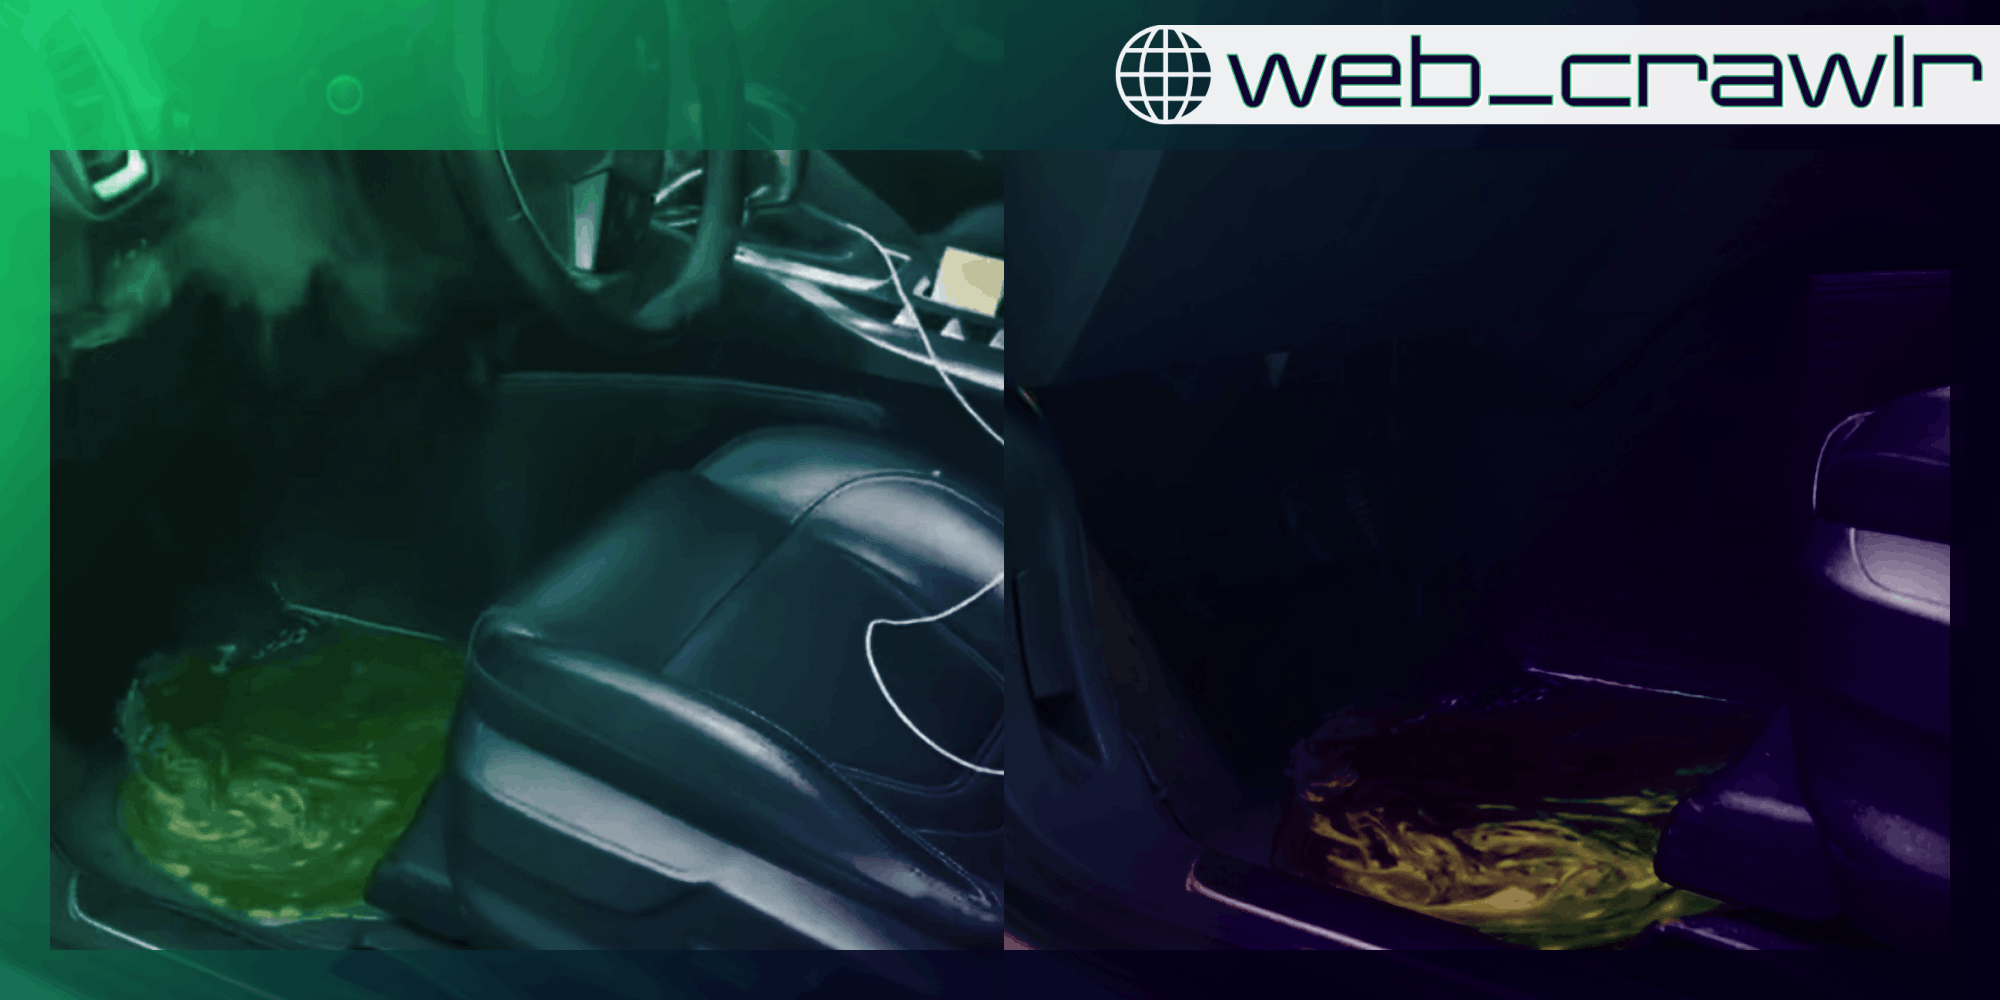 Green liquid pooling in a front car seat. The Daily Dot newsletter web_crawlr logo is in the top right corner.